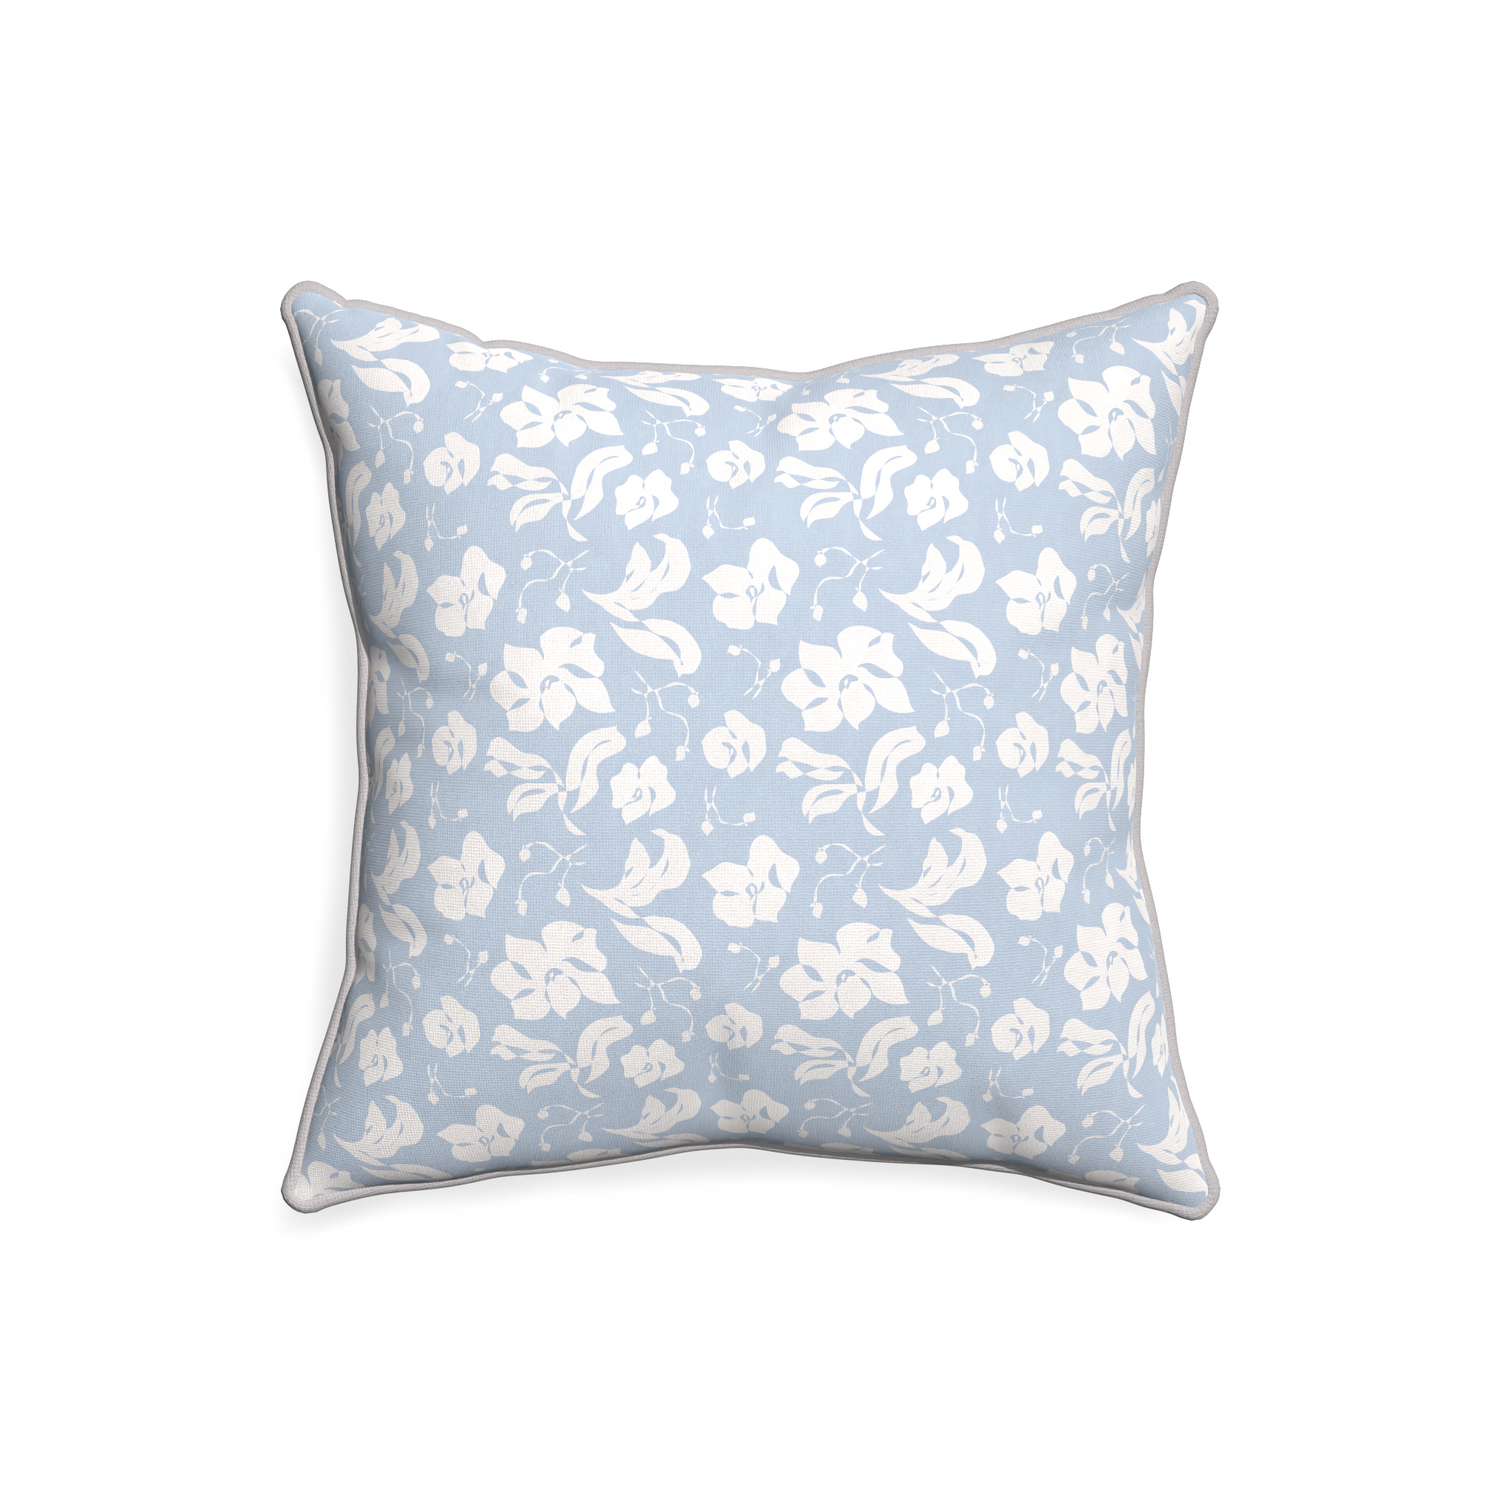 20-square georgia custom pillow with pebble piping on white background